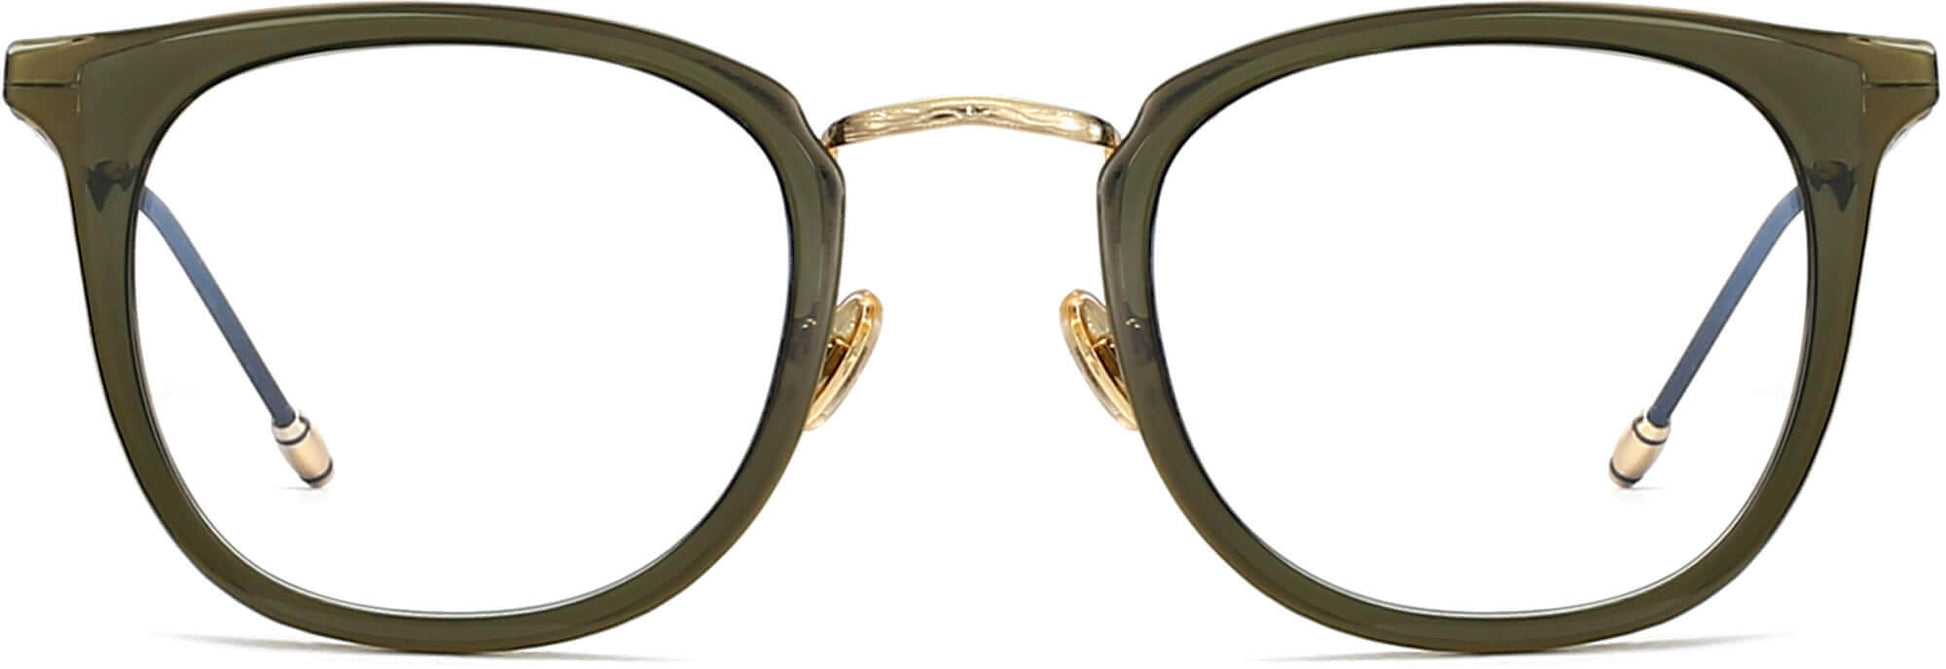 Raven Round Green Eyeglasses from ANRRI, front view